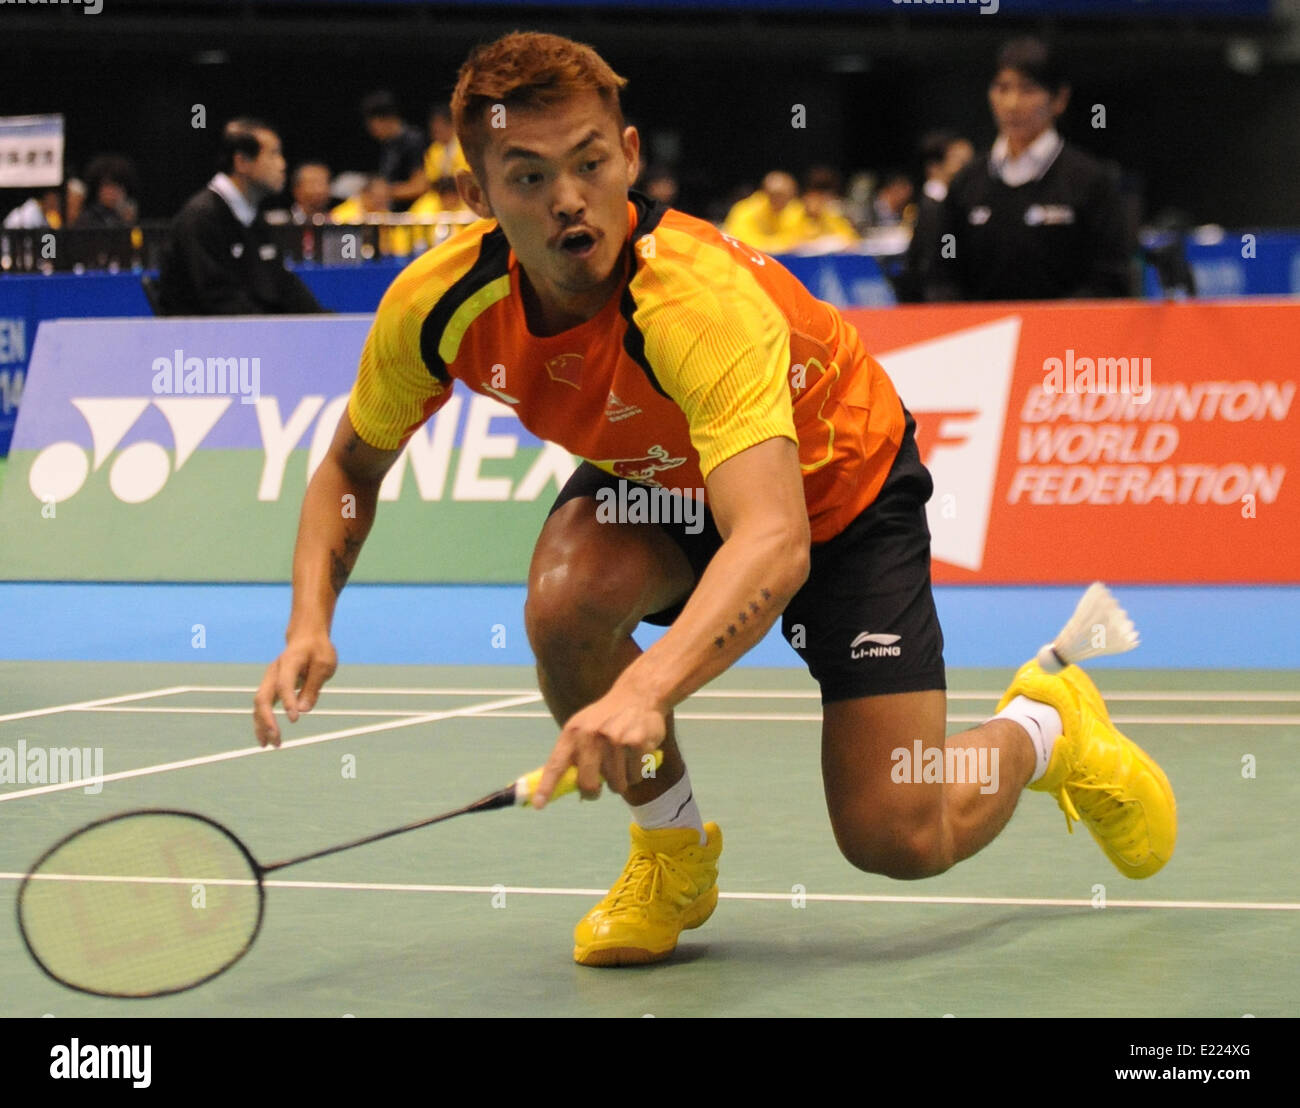 Tokyo, Japan. 13th June, 2014. Lin Dan of China competes against Jan O Jorgensen of Denmark during the men's singles quarter final match of Yonex Open Japan in Tokyo, Japan, June 13, 2014. Lin Dan lost 1-2. © Stringer/Xinhua/Alamy Live News Stock Photo